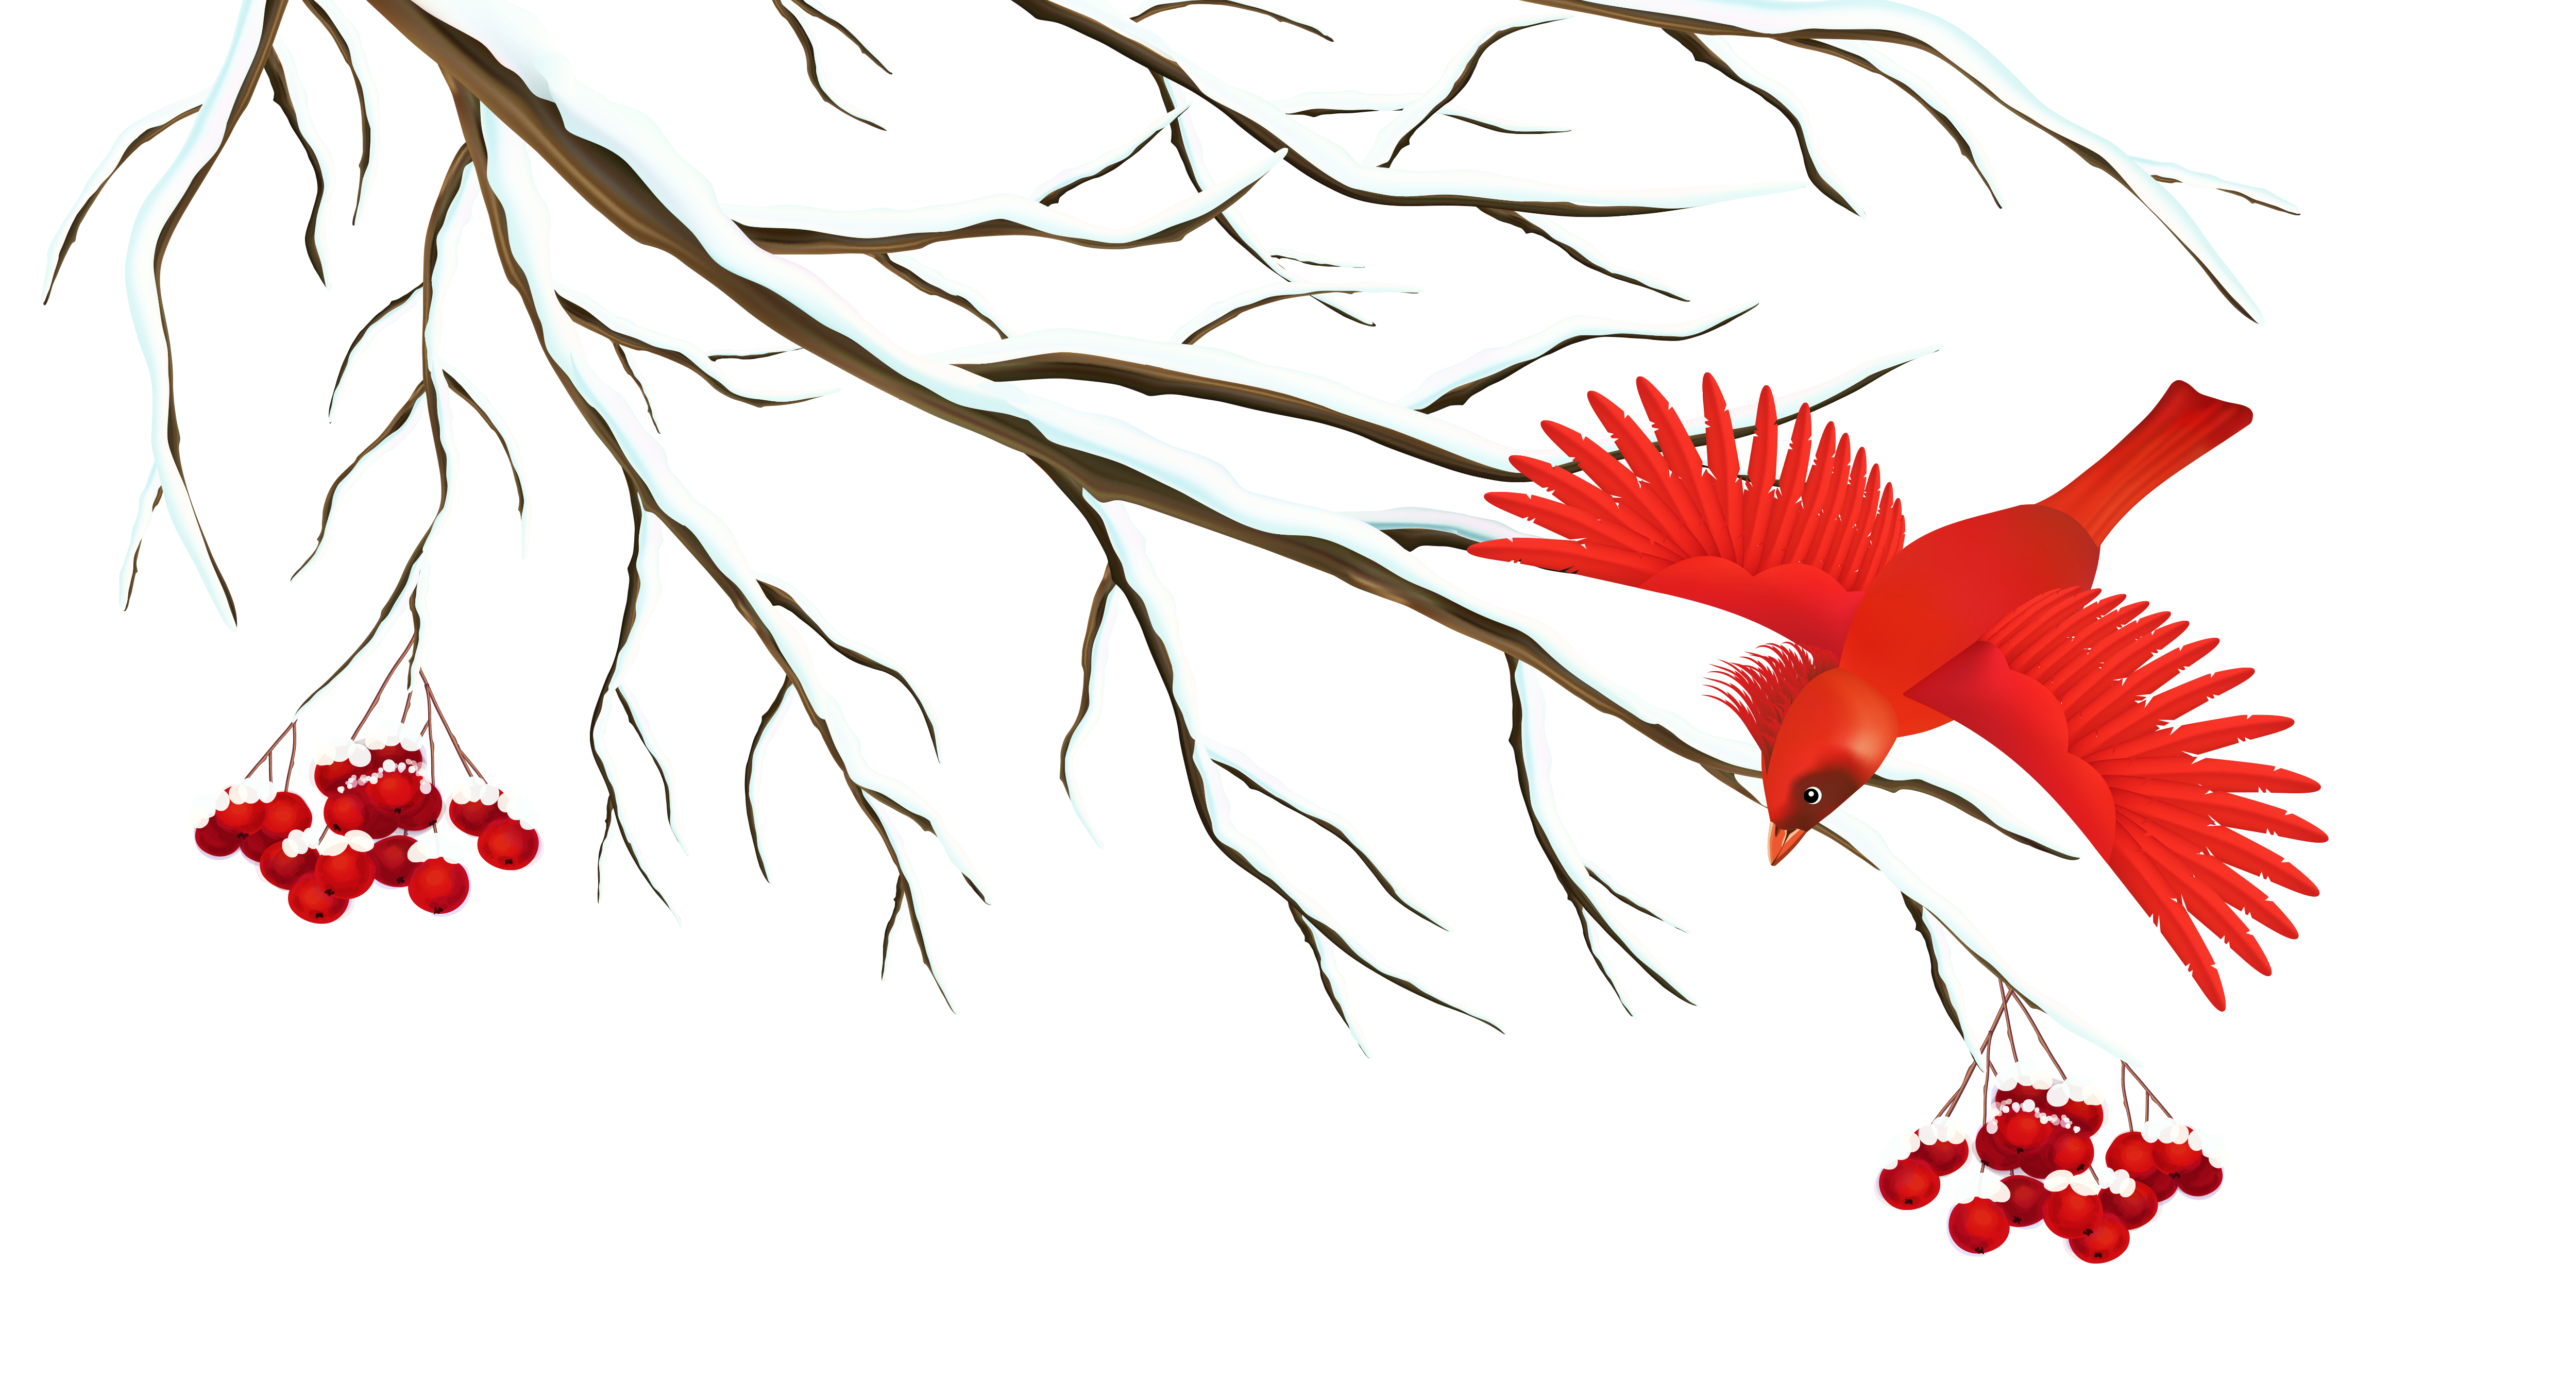 Winter snowy branch with. Garland clipart snow